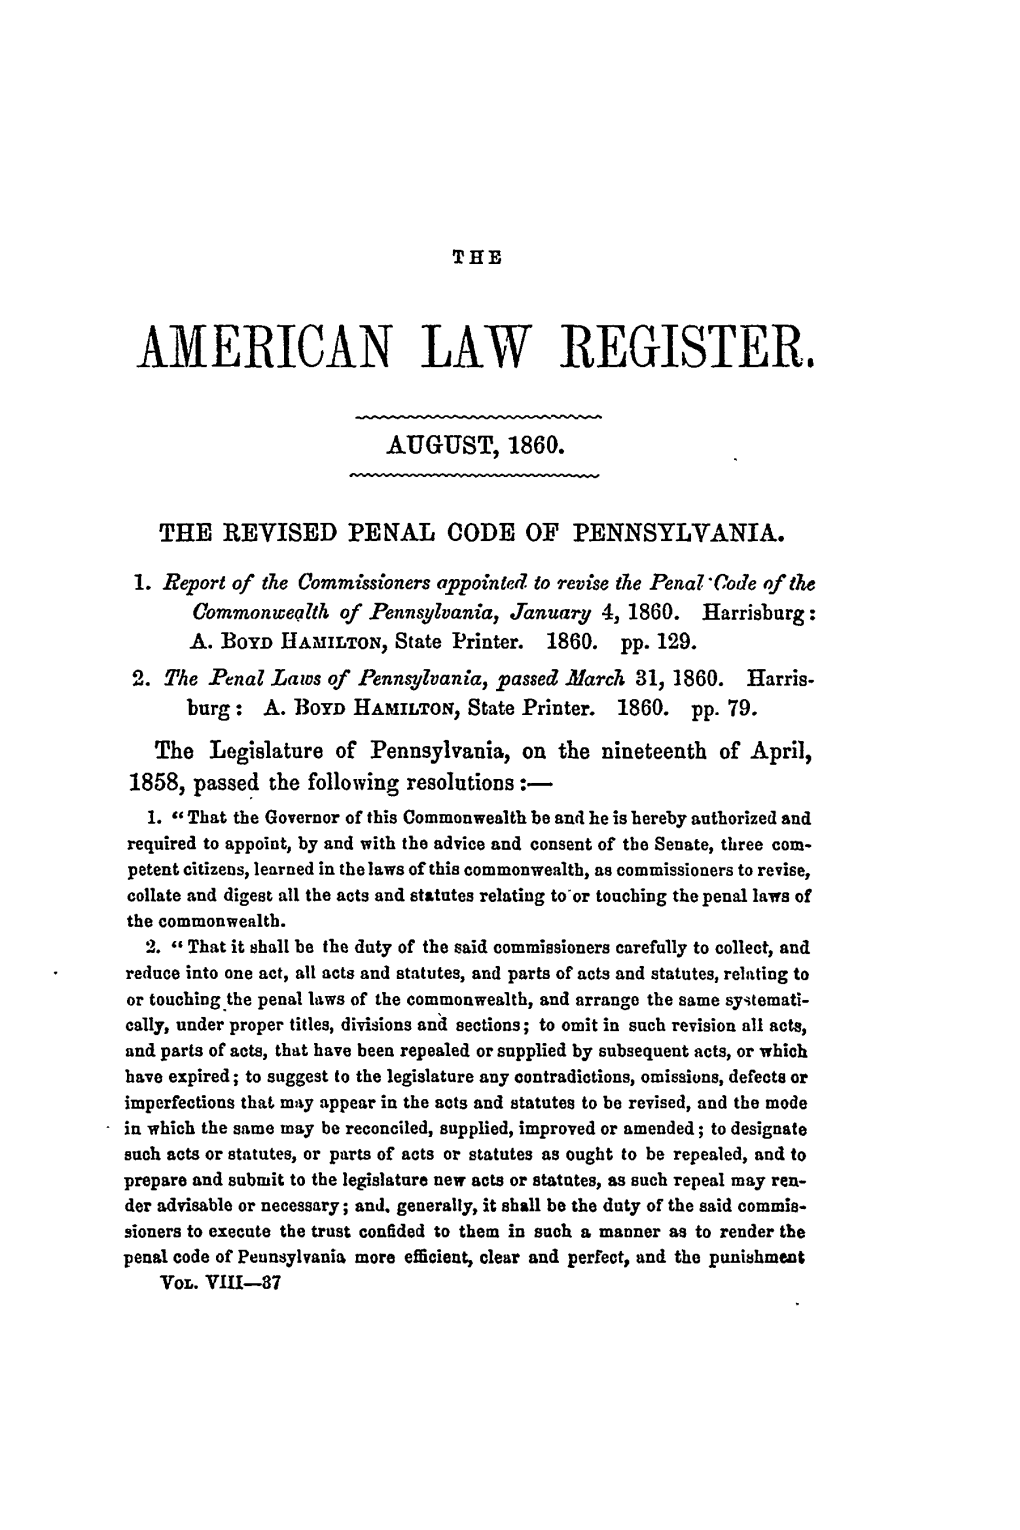 The Revised Penal Code of Pennsylvania